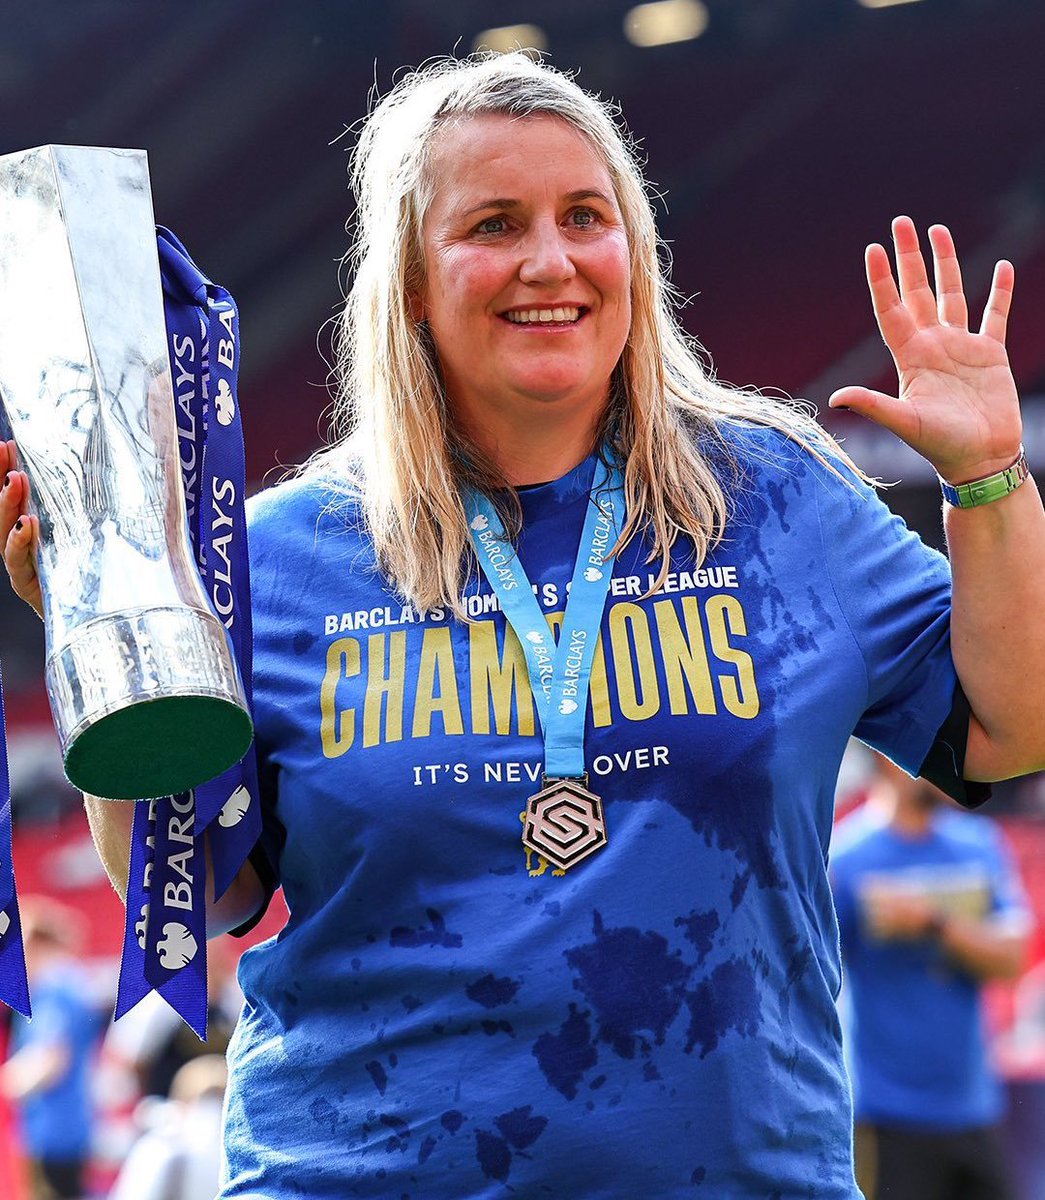 NEW WOMEN SUPER LEAGUE RECORD;

71 goals- Chelsea women have now officially scored the most goals in a single campaign in the Women's Super League surpassing Arsenal's record of 70 goals in the 18/19 season. 
Ruthless 
#CFCW